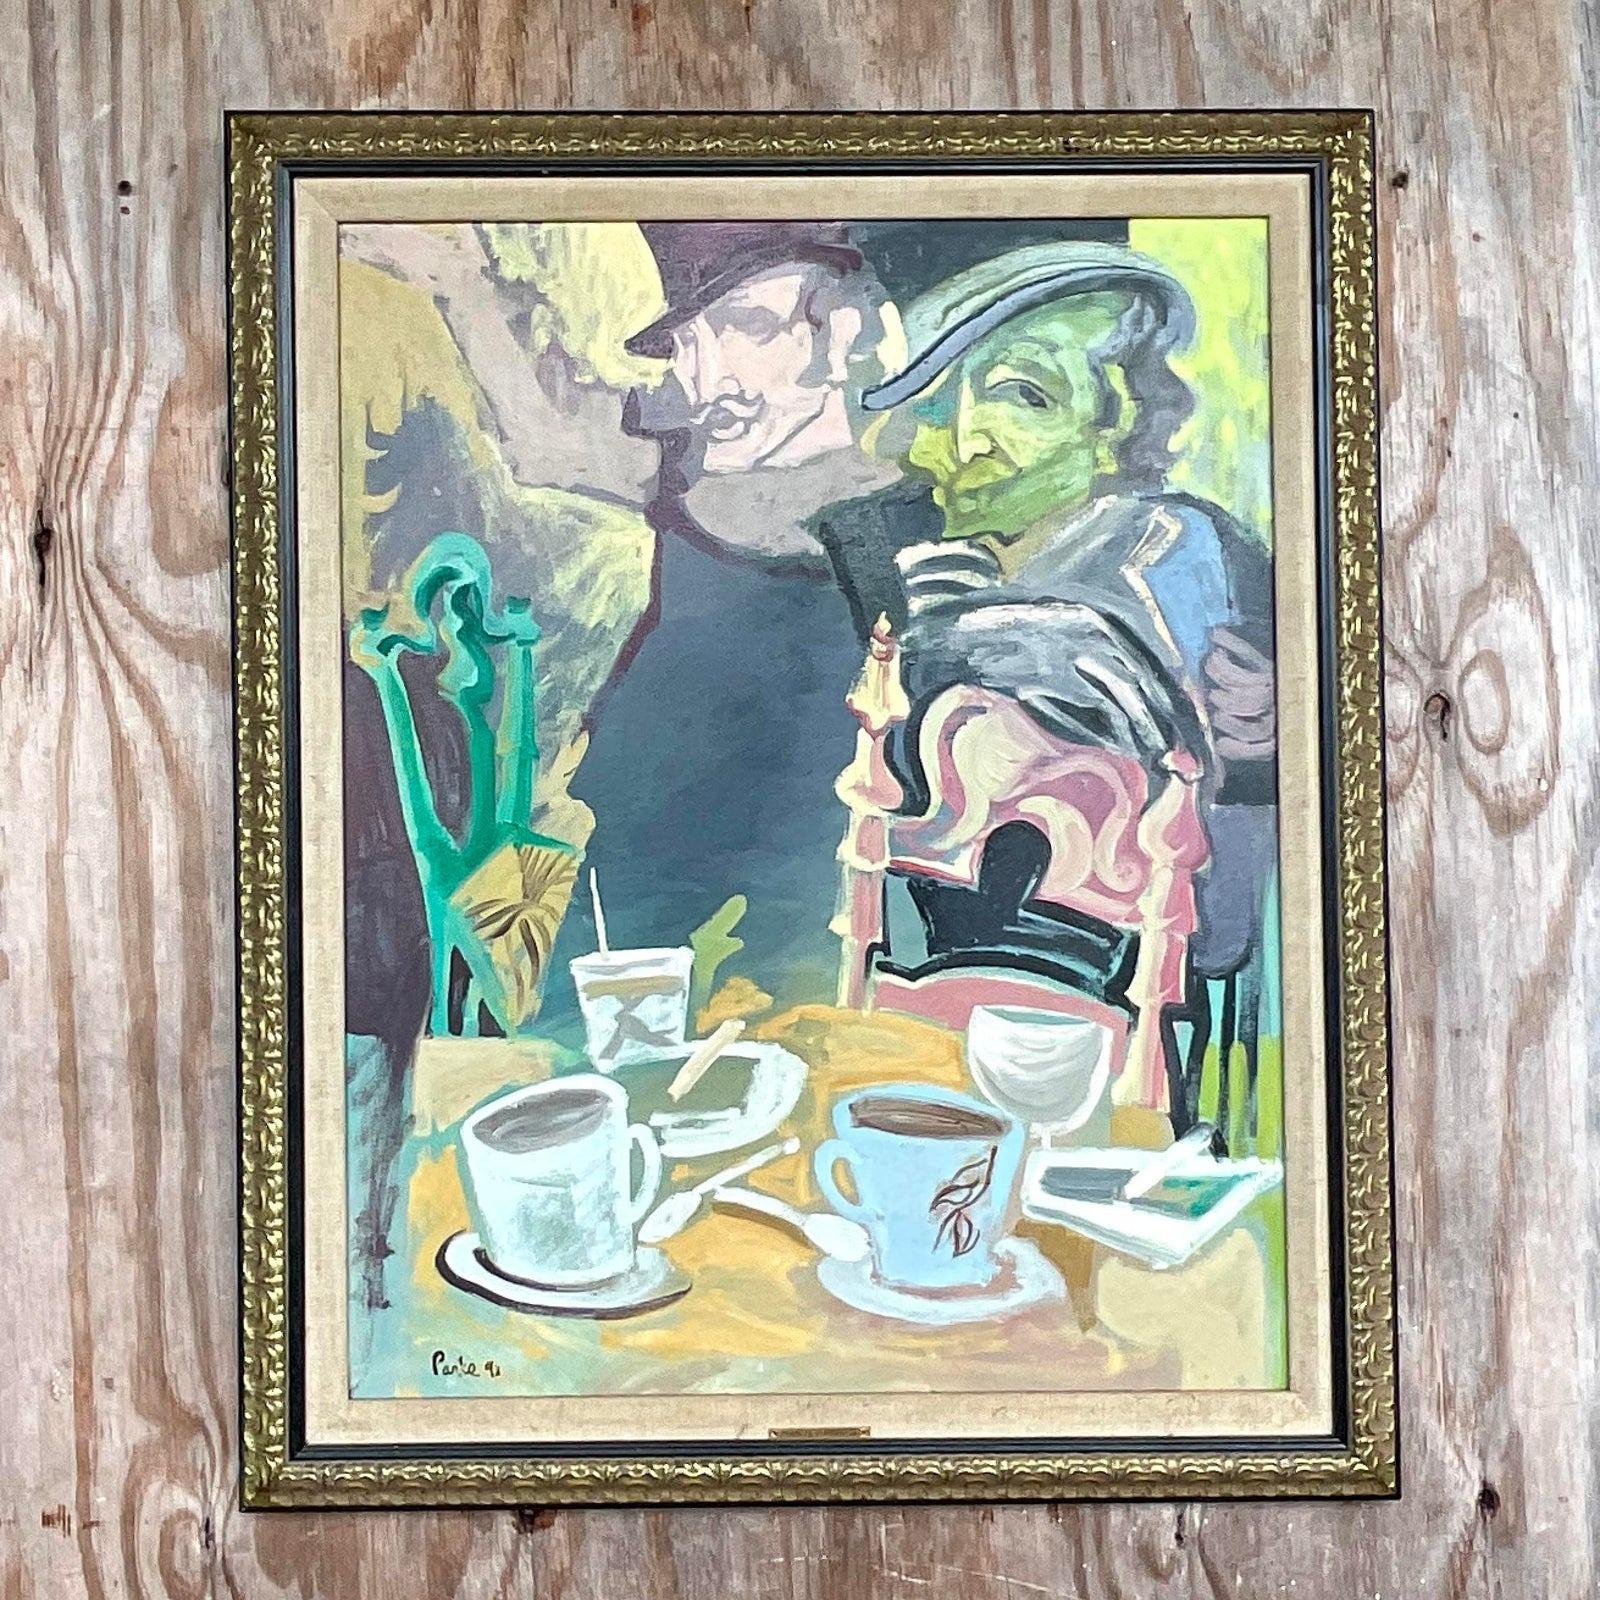 A sensational vintage Boho original oil painting. A brilliant compassions of an interior Figural in bright clear colors. Signed by the artist Parks. Acquired from a Palm Beach estate.